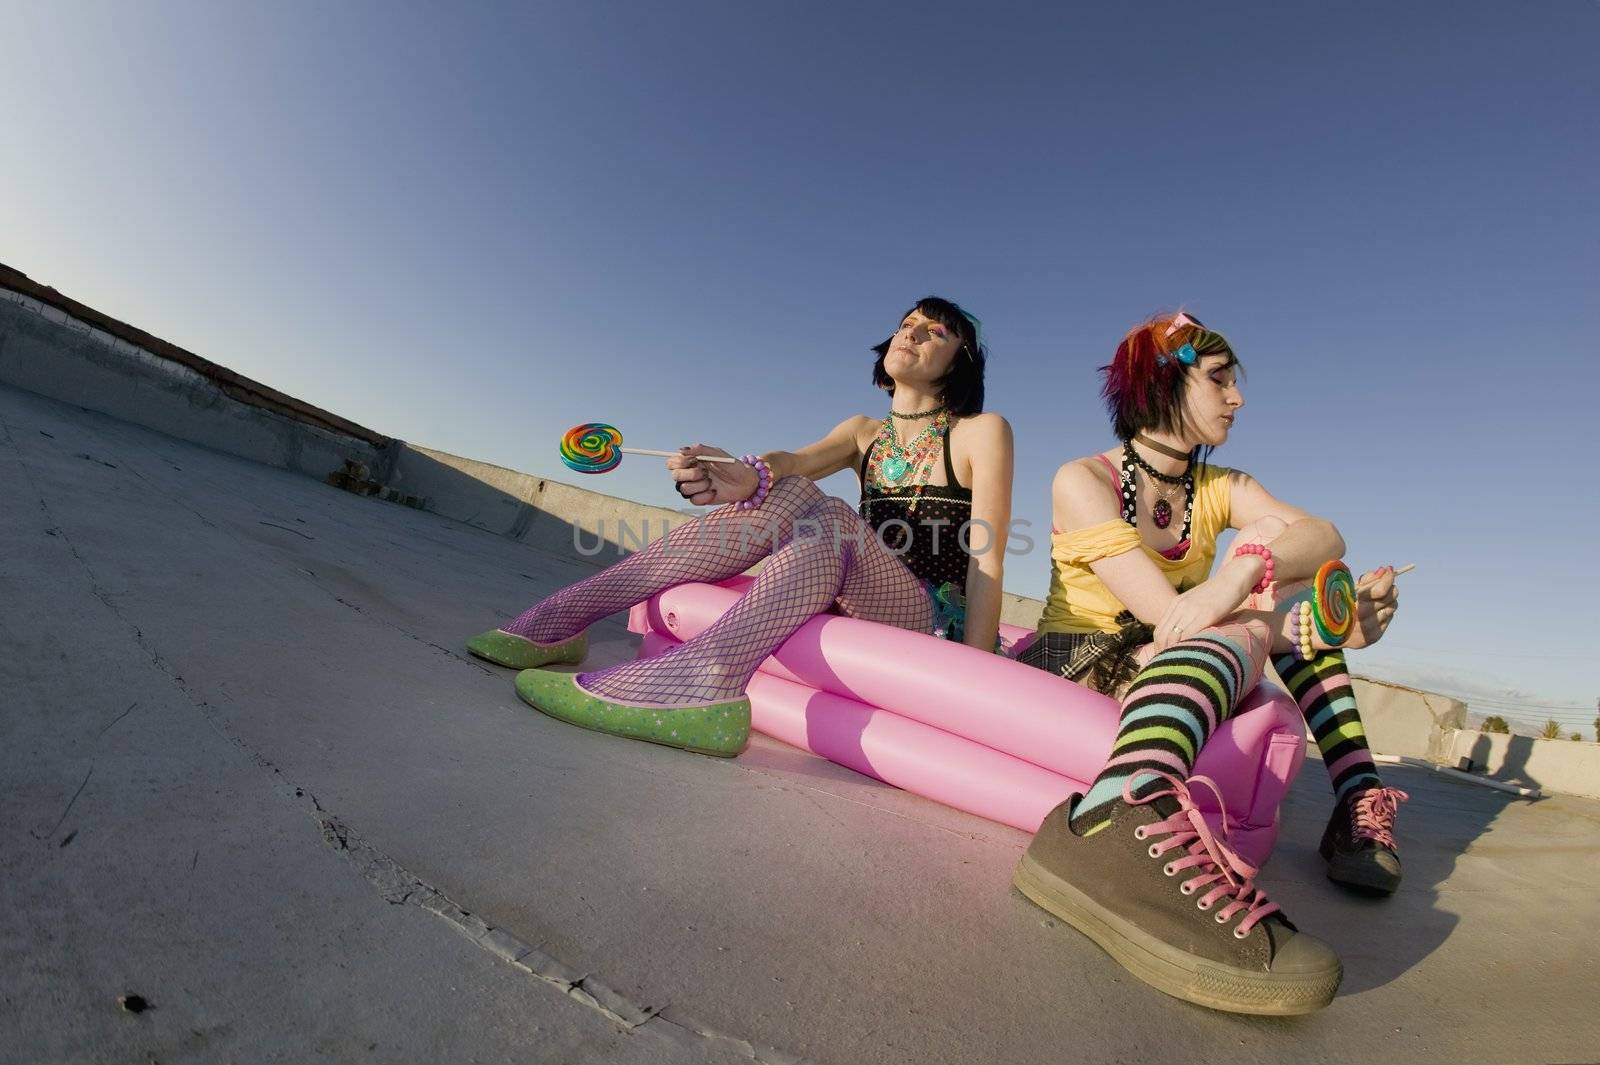 Fisheye shot of girls in brightly colored clothing in a plastic pool on a roof with sunglasses and lollipops